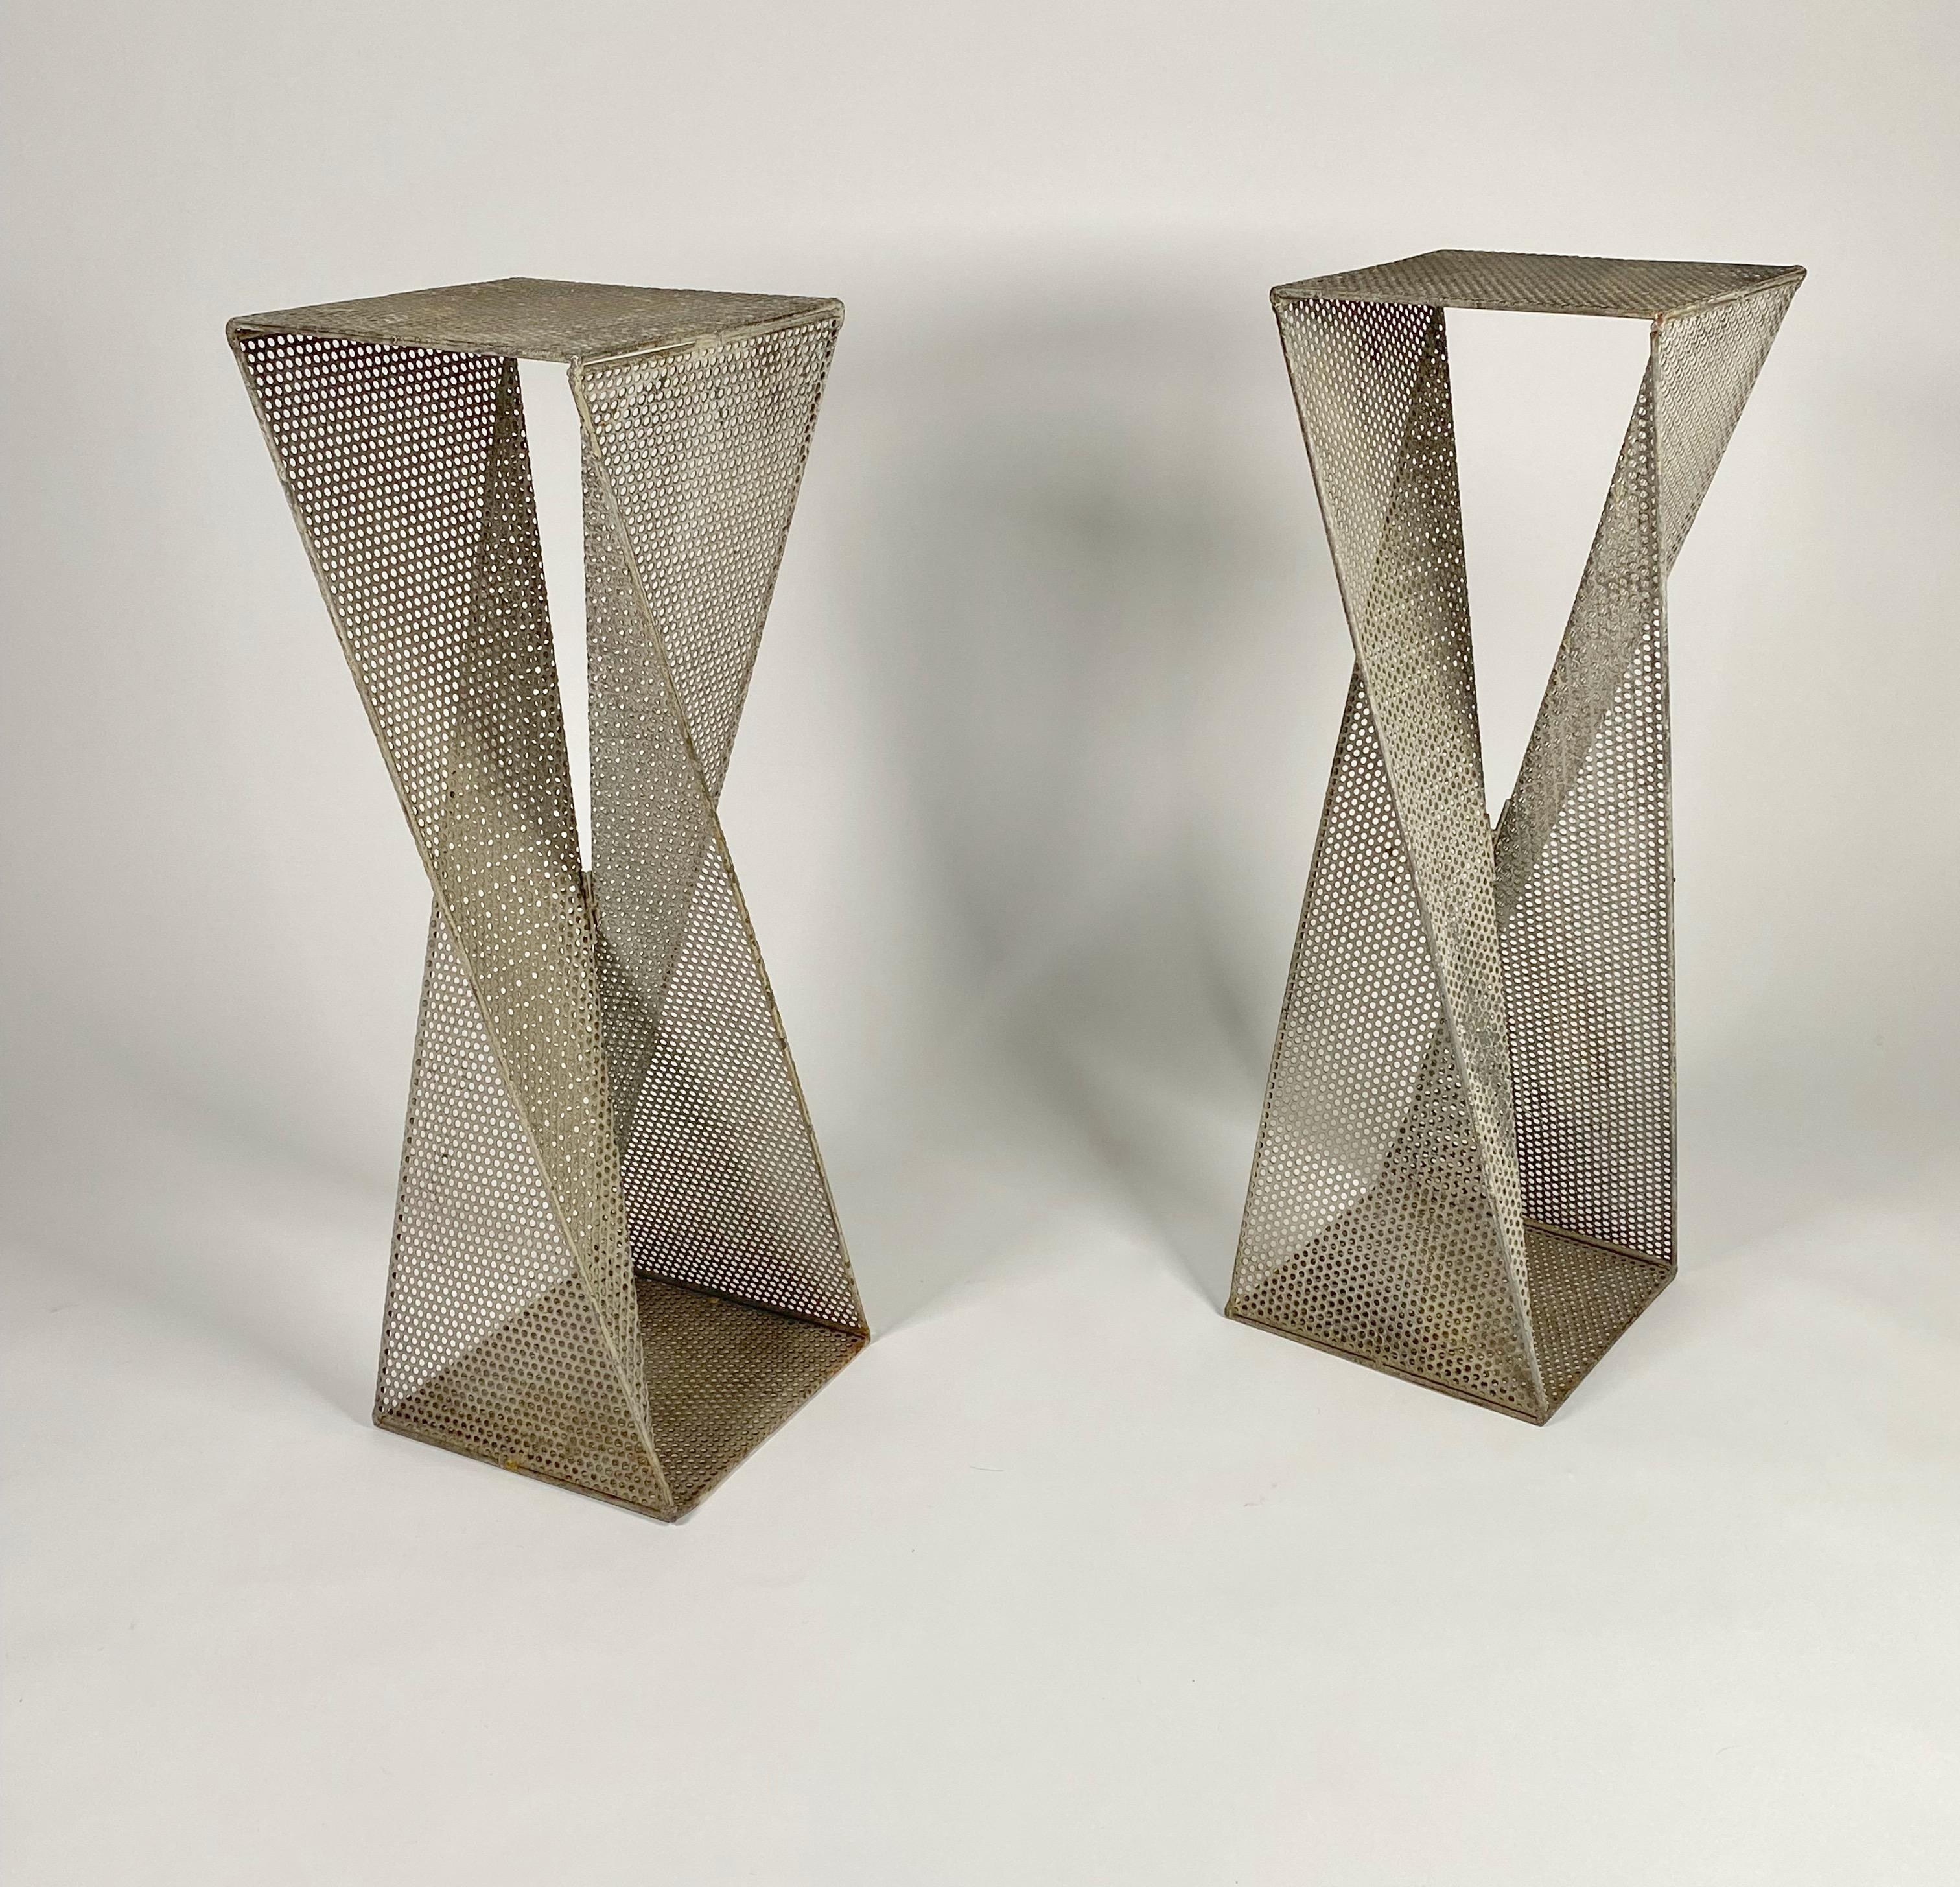 Late 20th Century Pair of Perforated Metal Pedestals in the Style of Mathieu Mategot